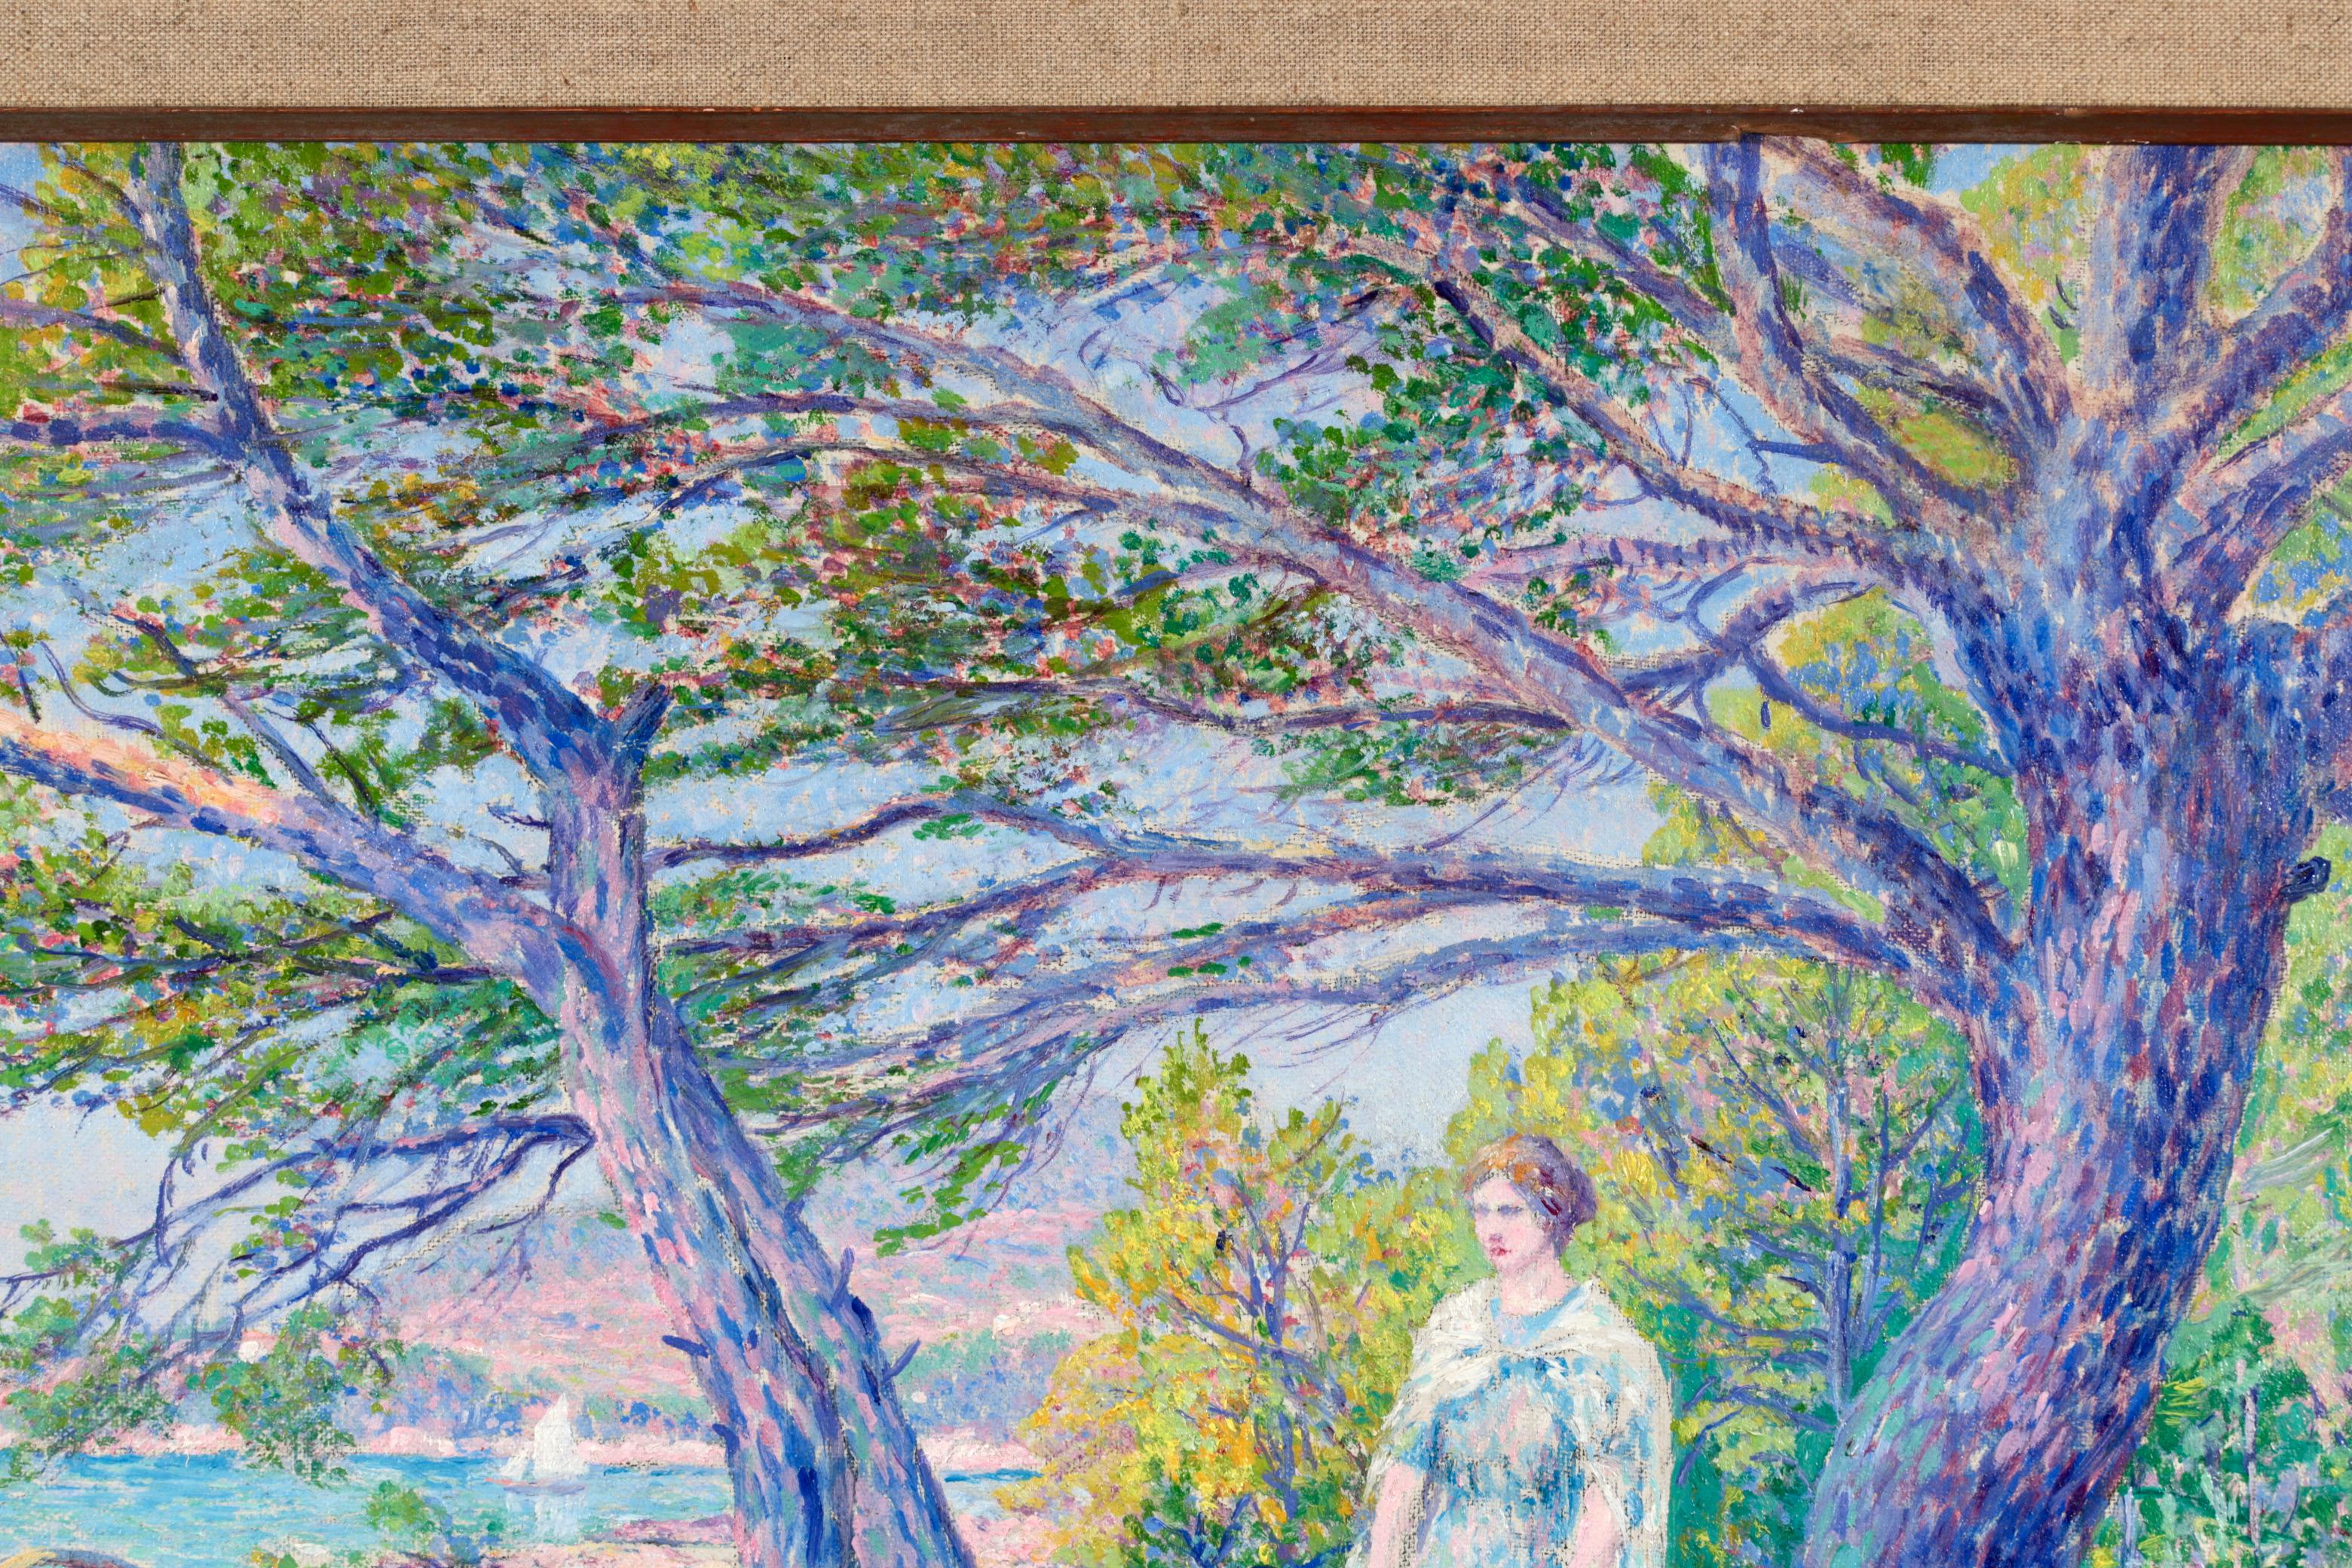 A wonderful pointillist oil on canvas circa 1910 by French neo-impressionist painter Louis Gaidan. The painting is beautifully and strikingly coloured and depicts a woman in a blue dress enjoying a walk on a dirt path in the shade of trees by the